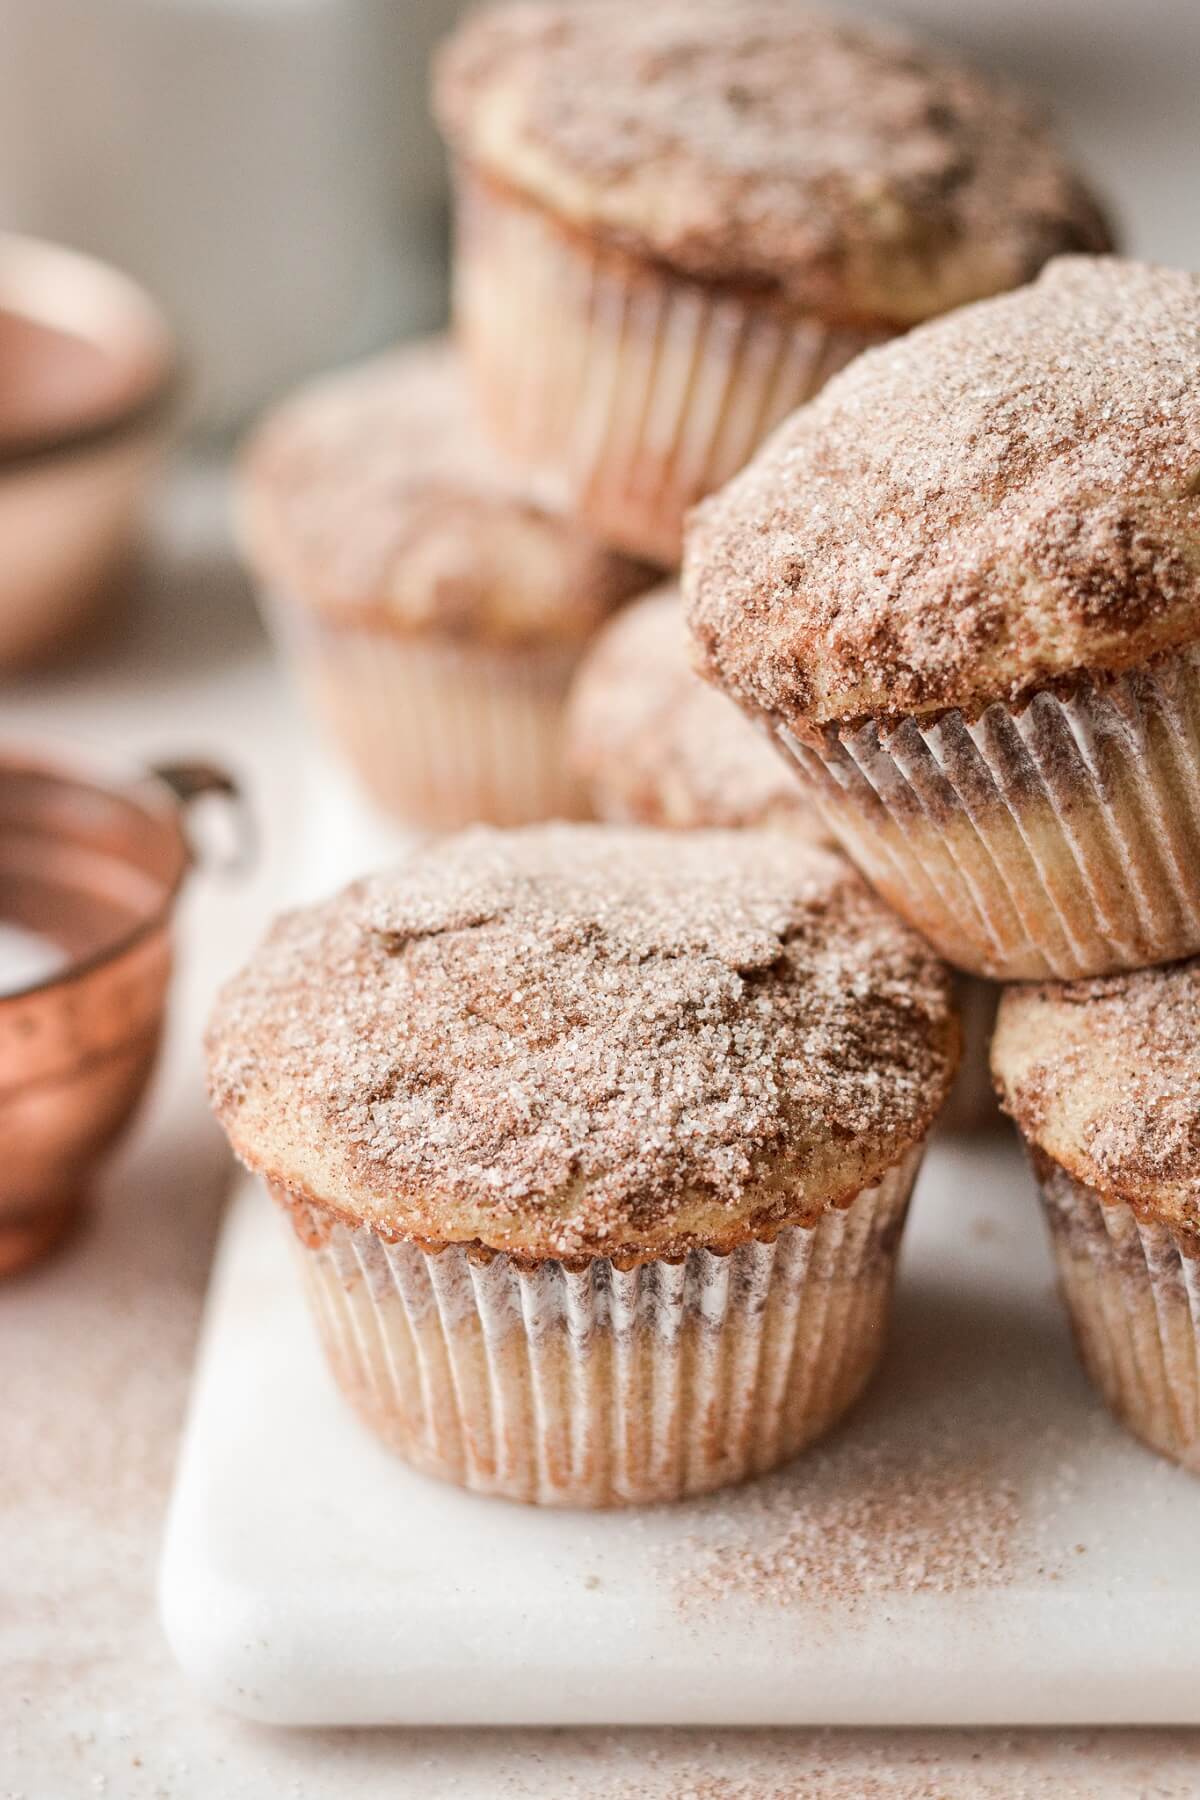 Cinnamon and sugar sprinkled on top of snickerdoodle muffins.